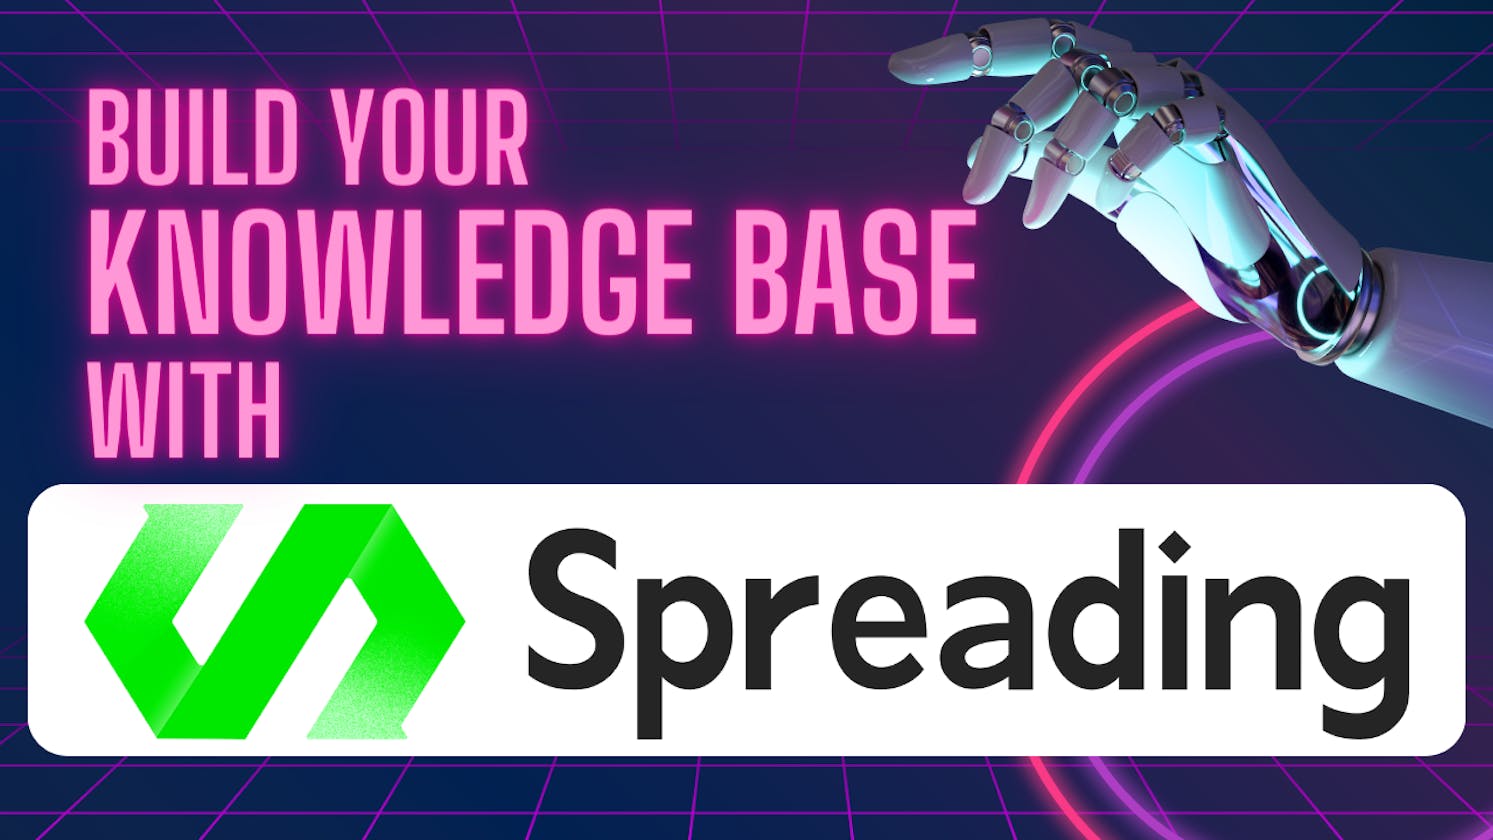 Build your knowledge base with Spreading